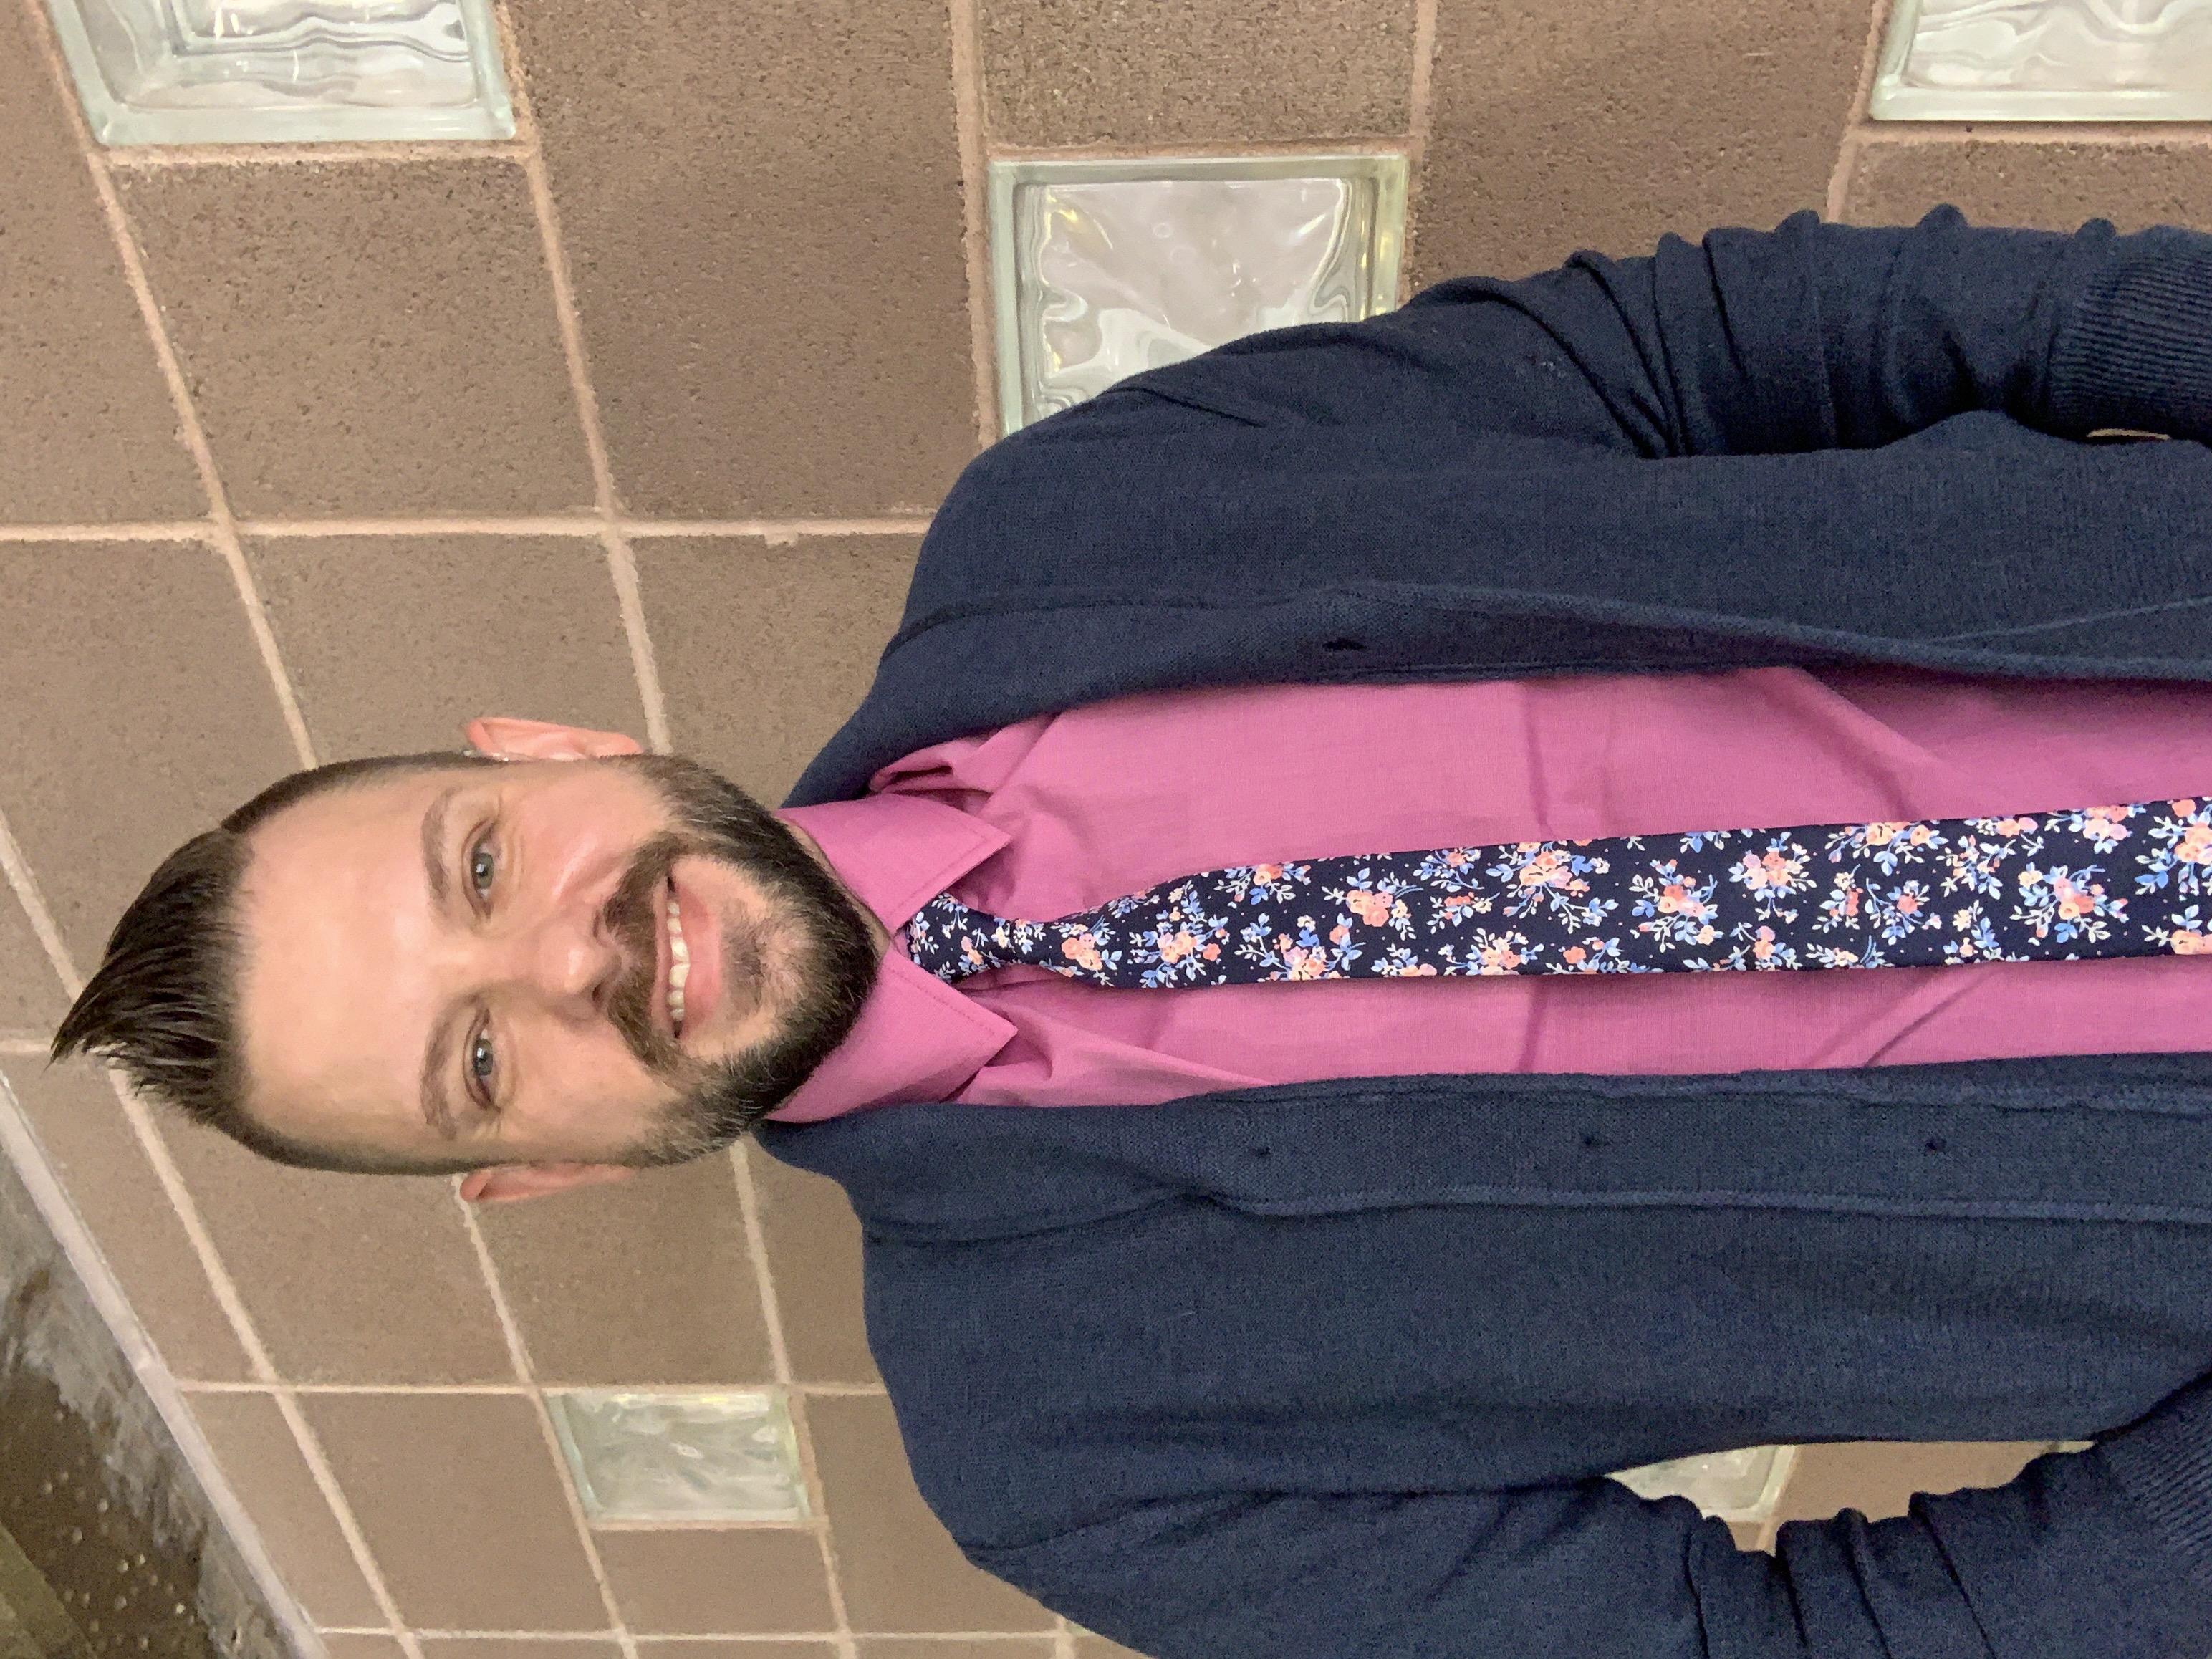 Smiling man with short brown hair and beard, wearing pink button down shirt, dark blue cardigan sweater, blue floral tie.